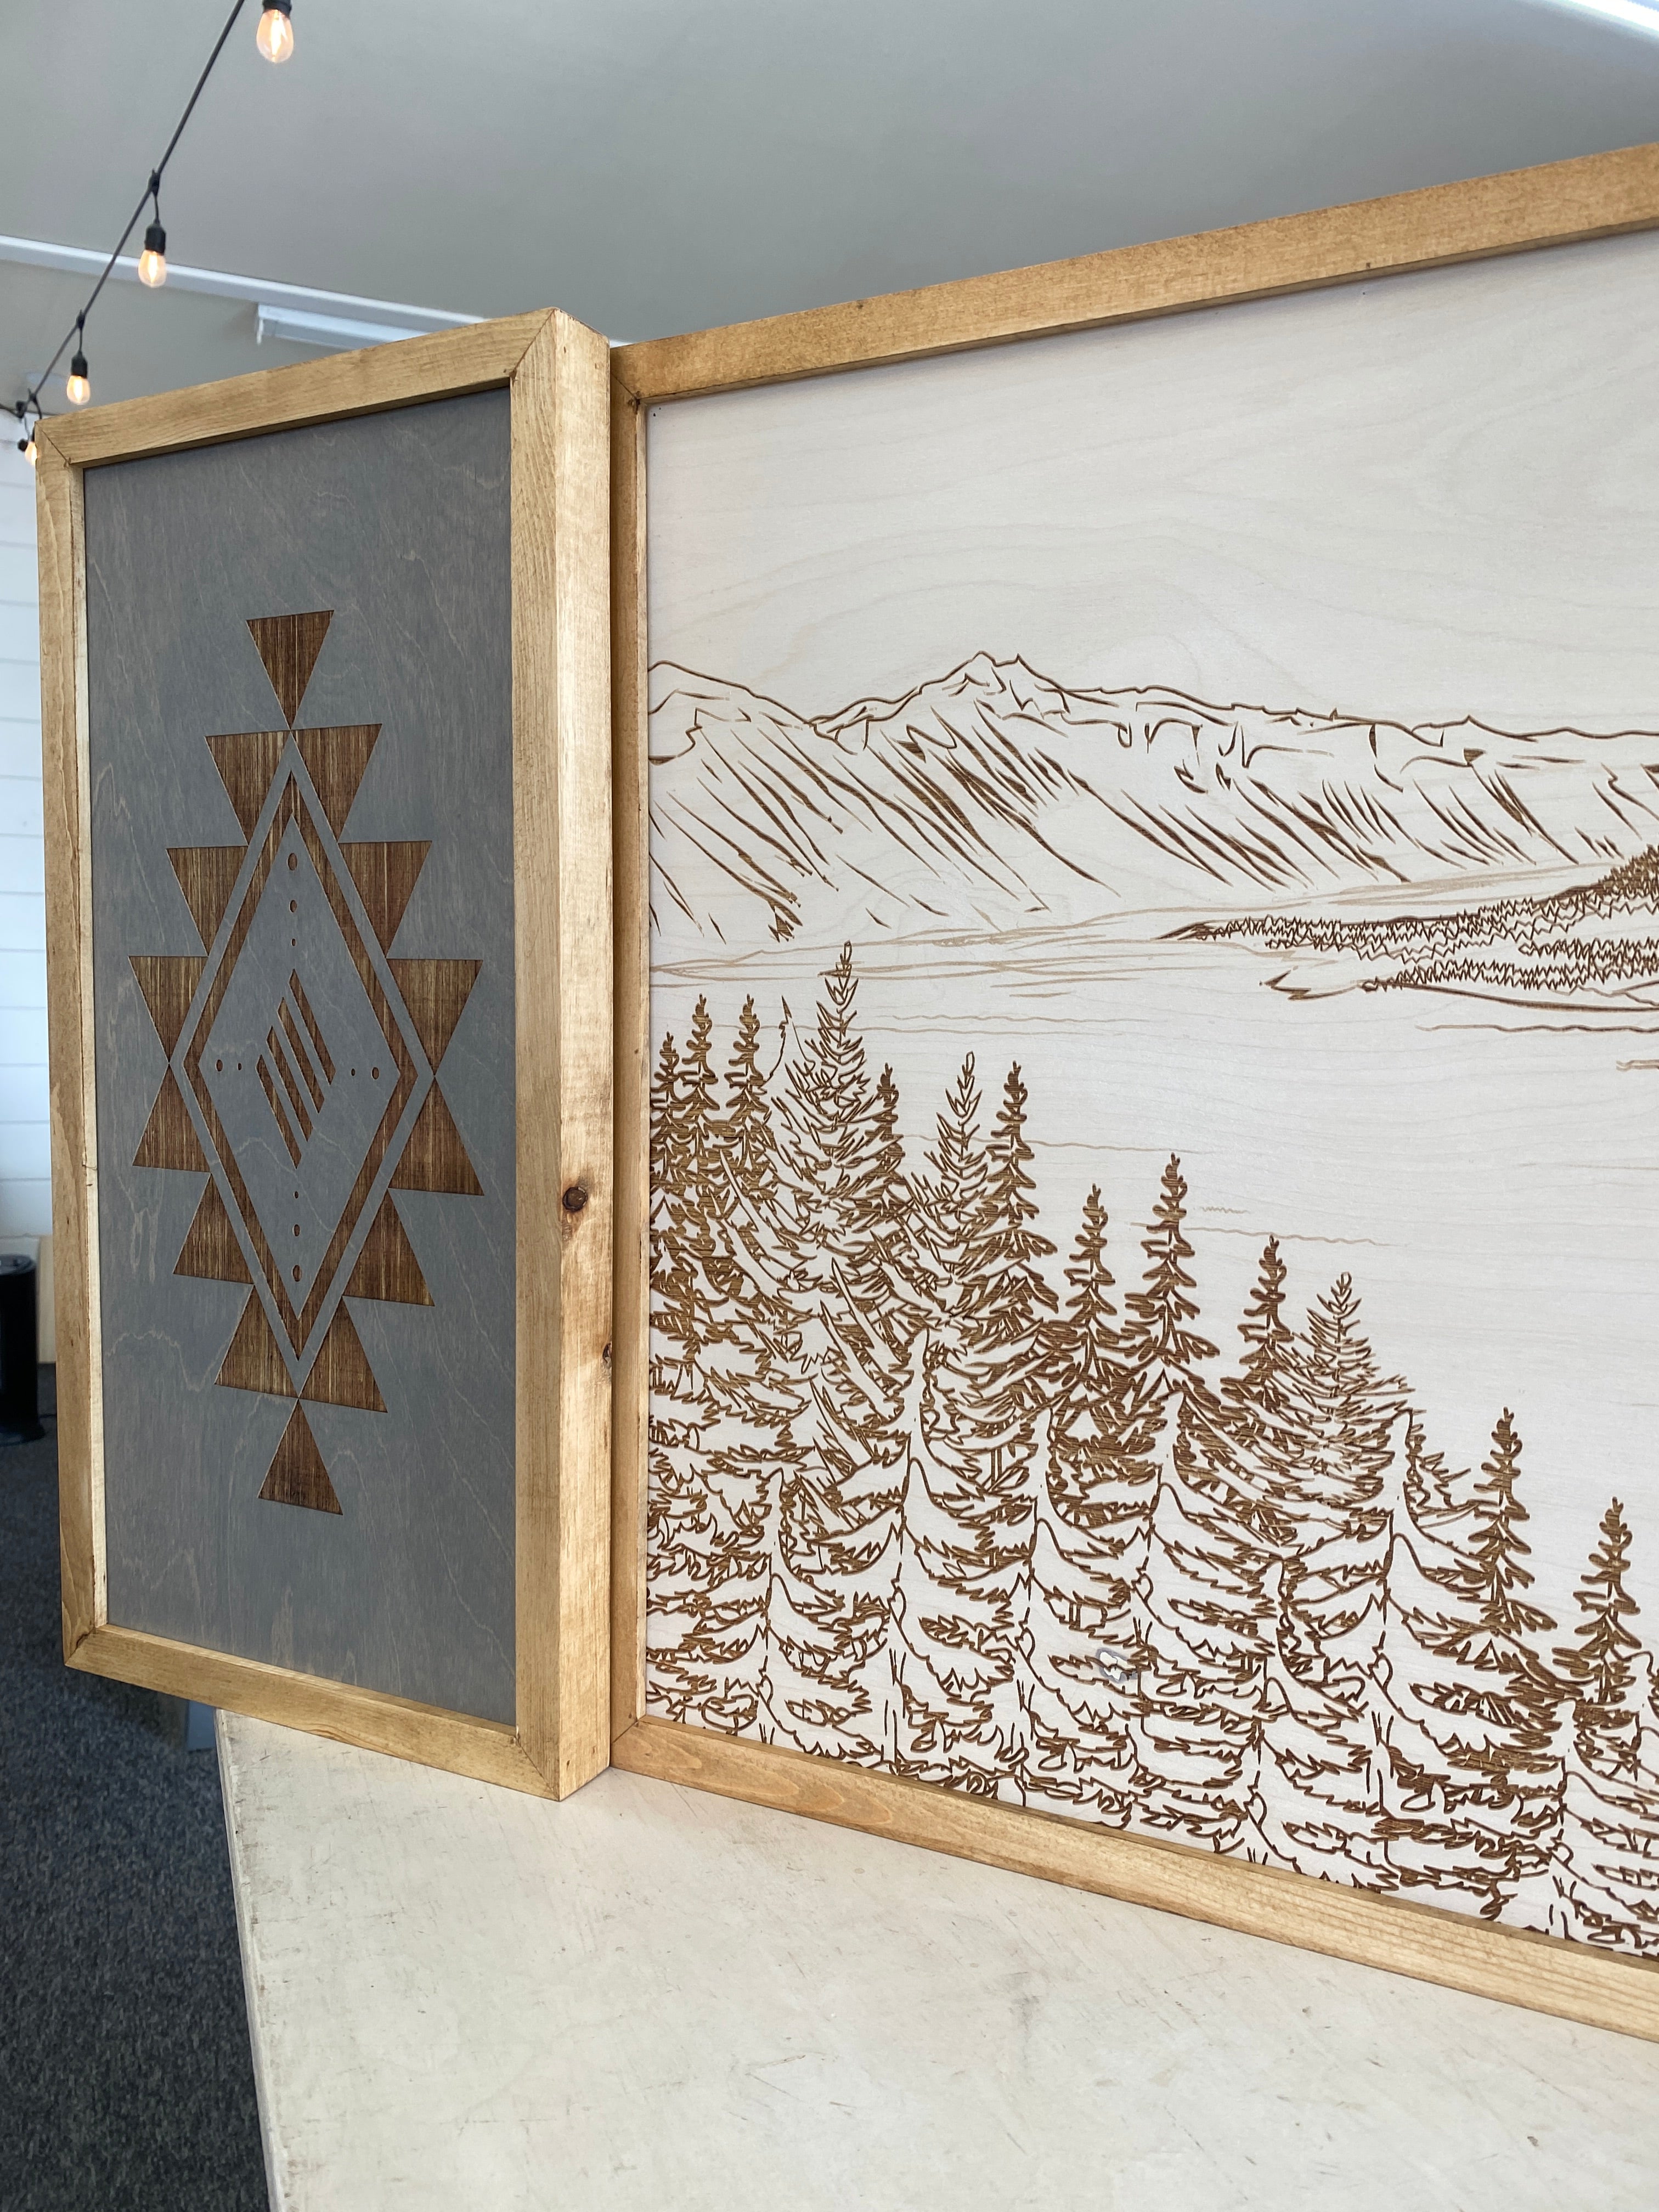 3 Piece Hand Sketched Crater Lake Wood Artwork with Aztec Diamond